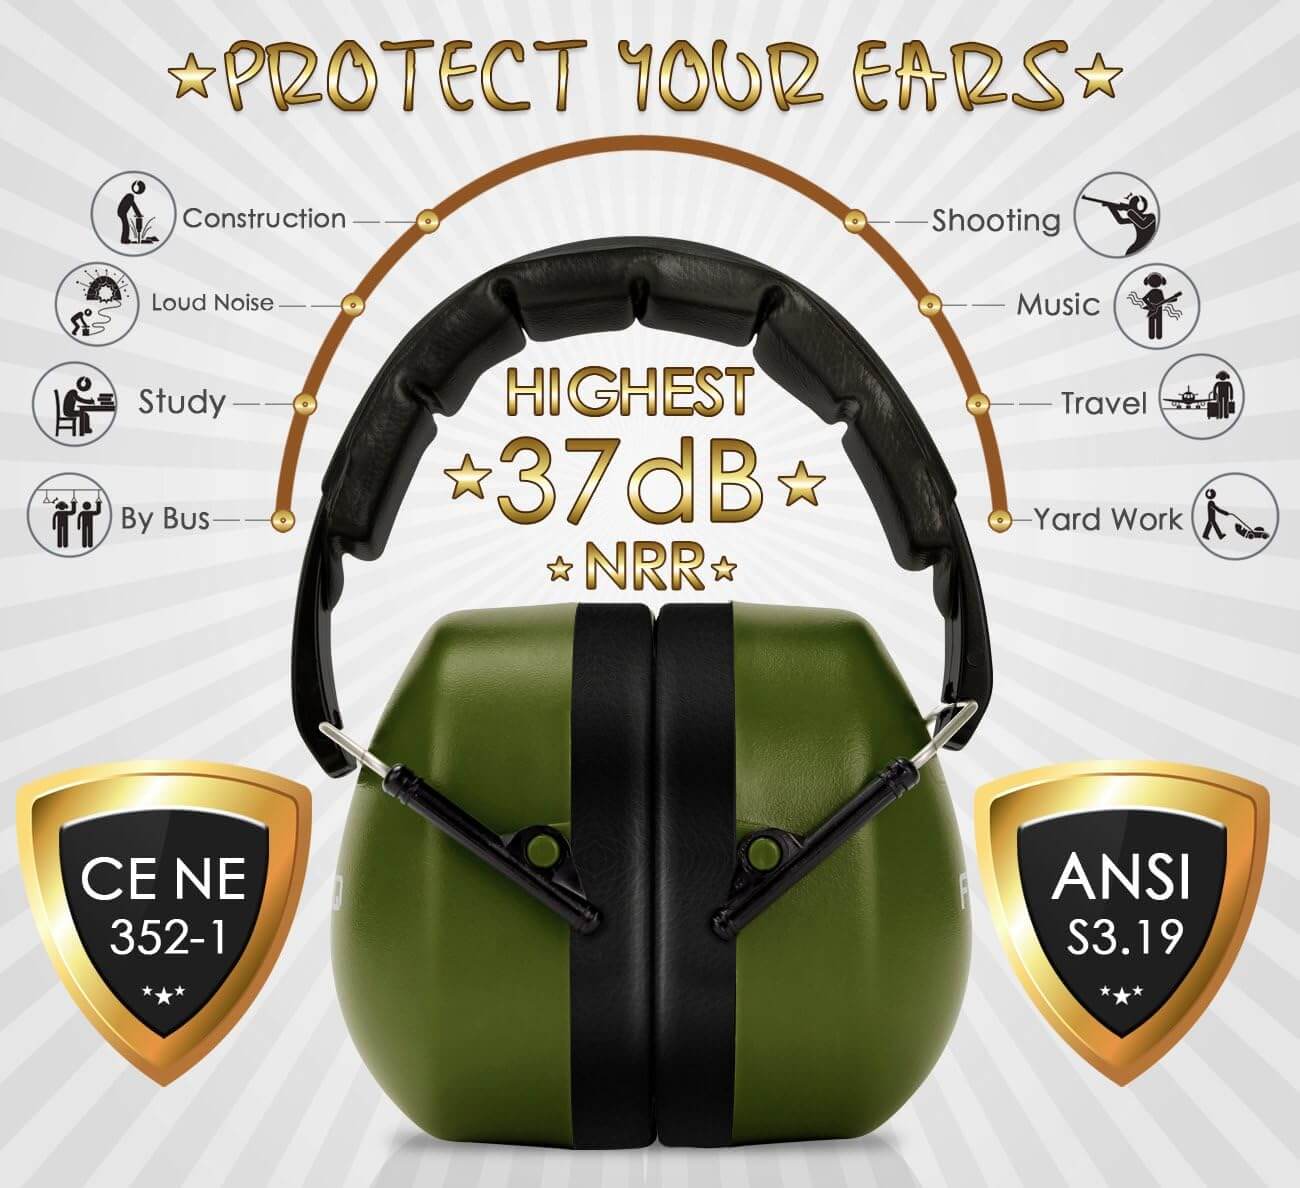 FRiEQ 37 dB NRR Sound Technology Safety Ear Muffs with LRPu Foam for Shooting, Music & Yard Work - Protect your ears